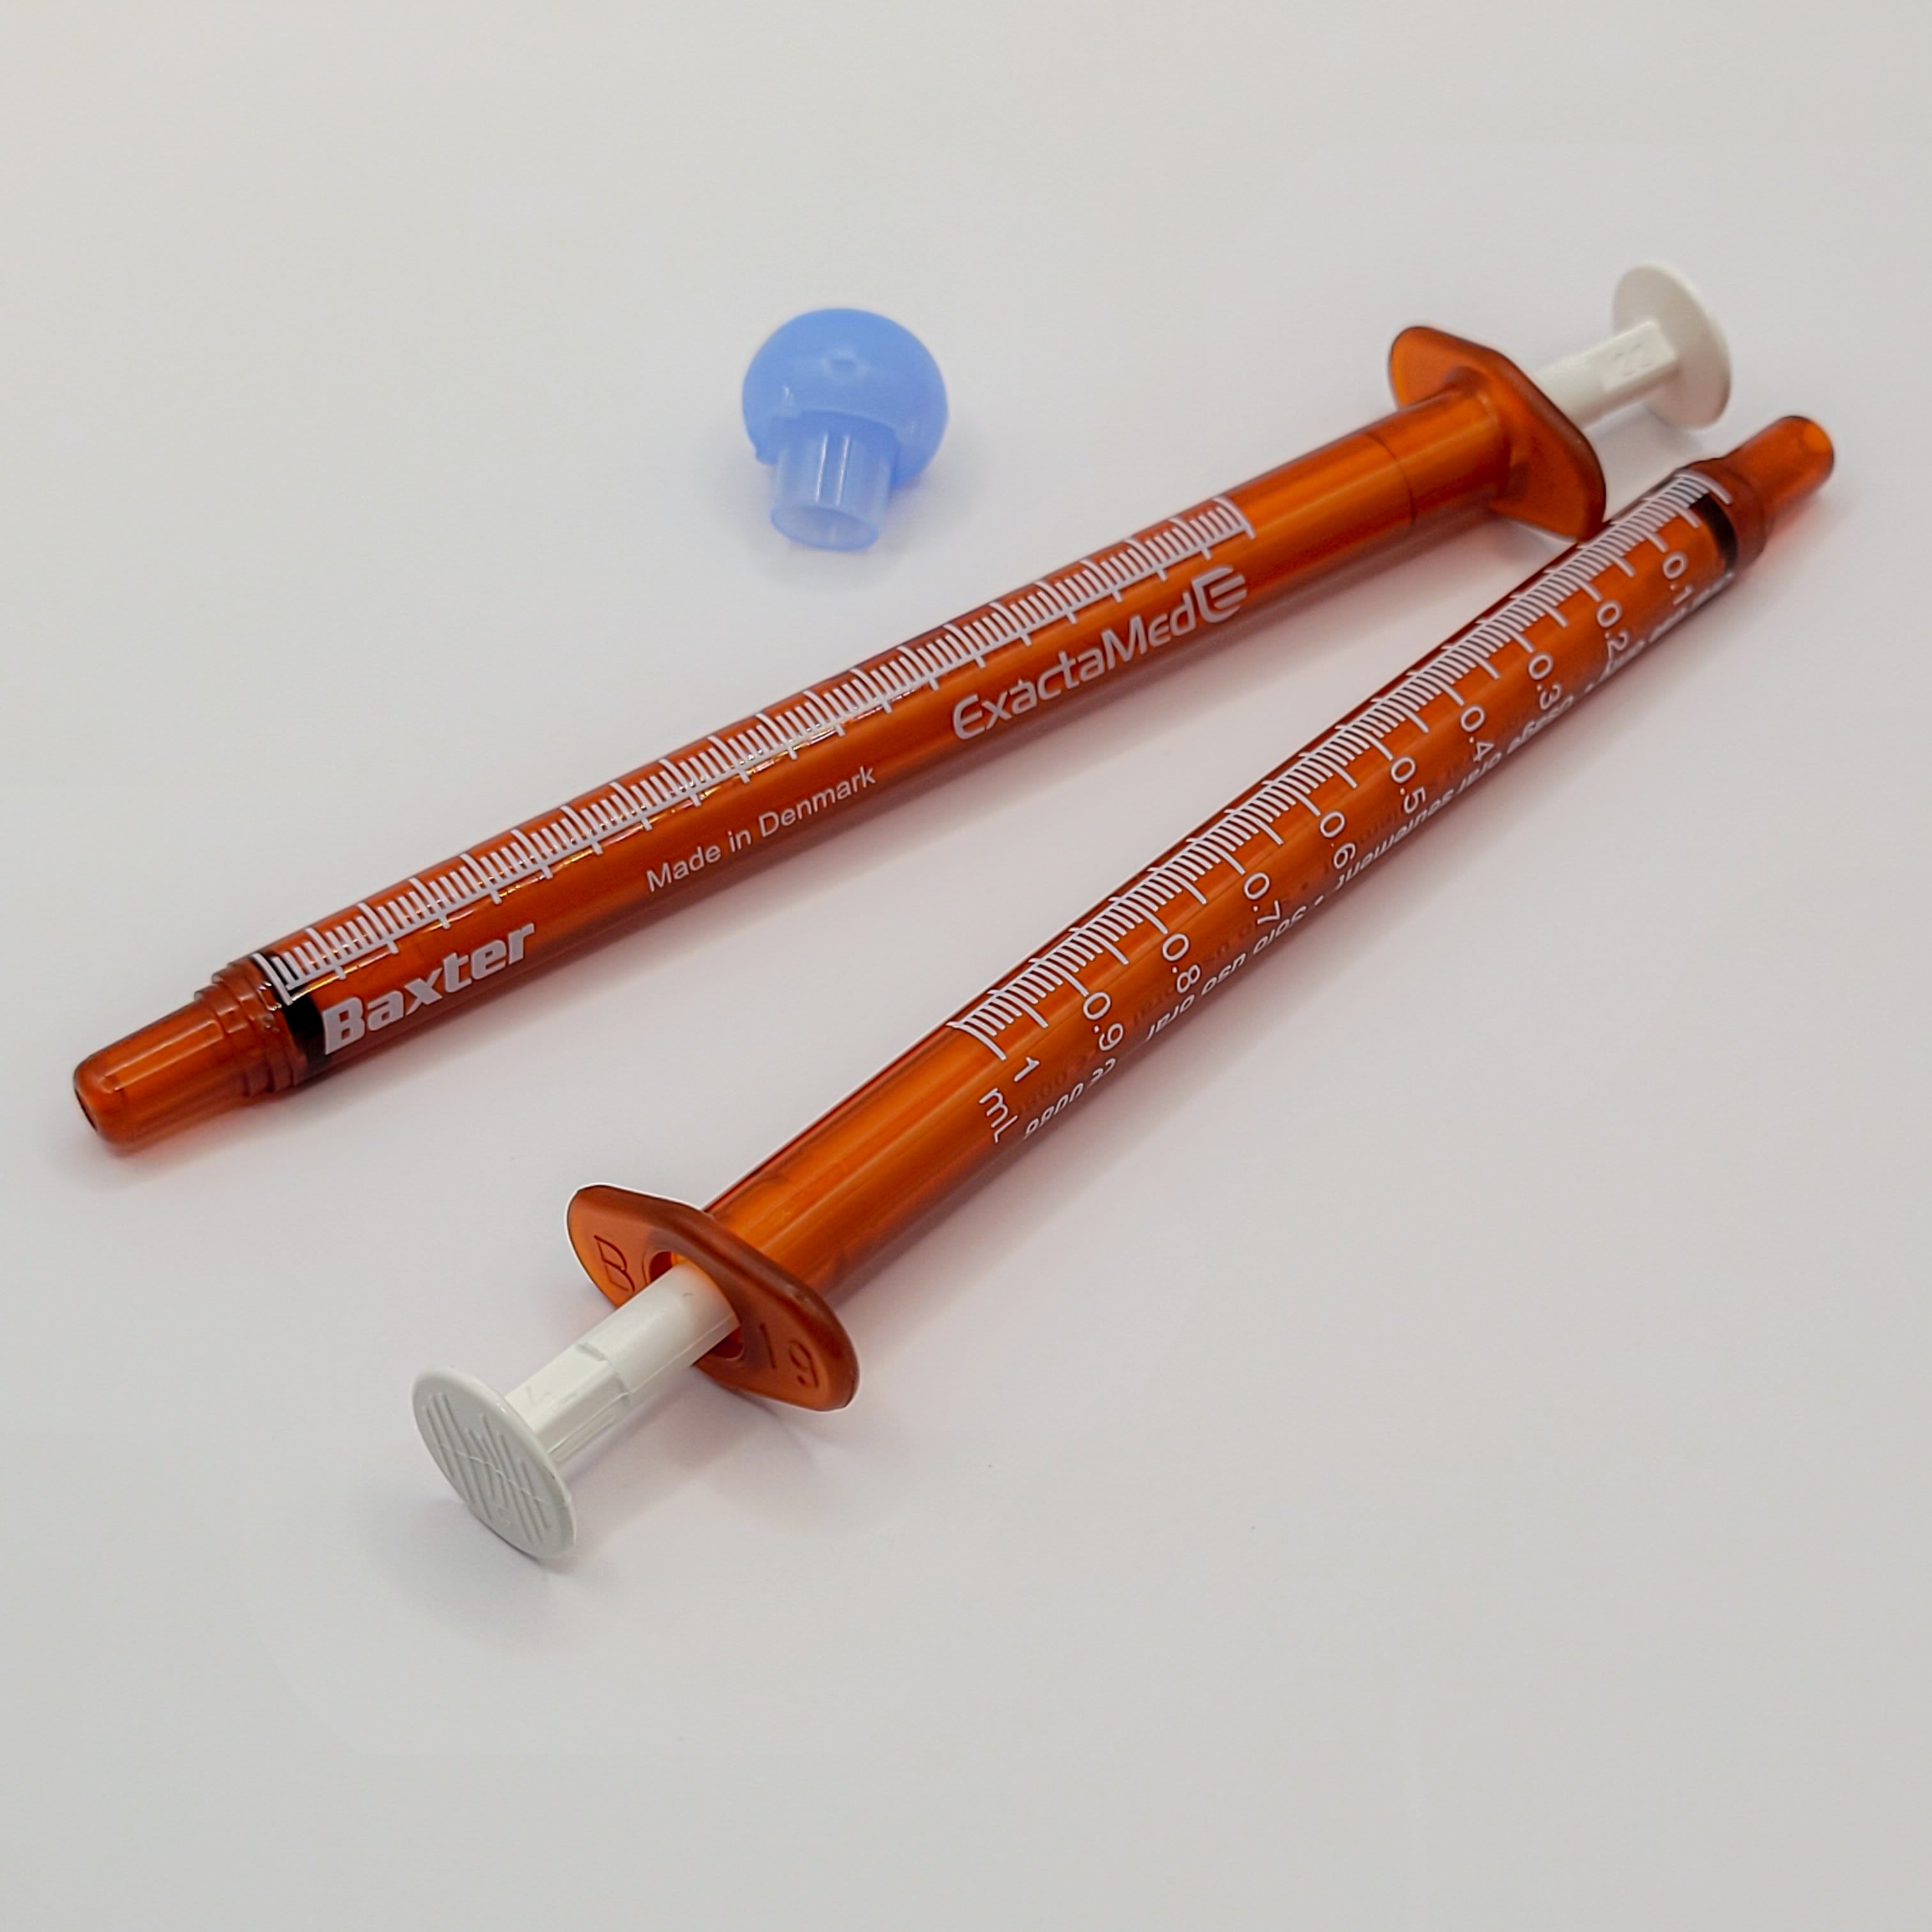 BAXA Amber Oral Syringes with tips (1ml)